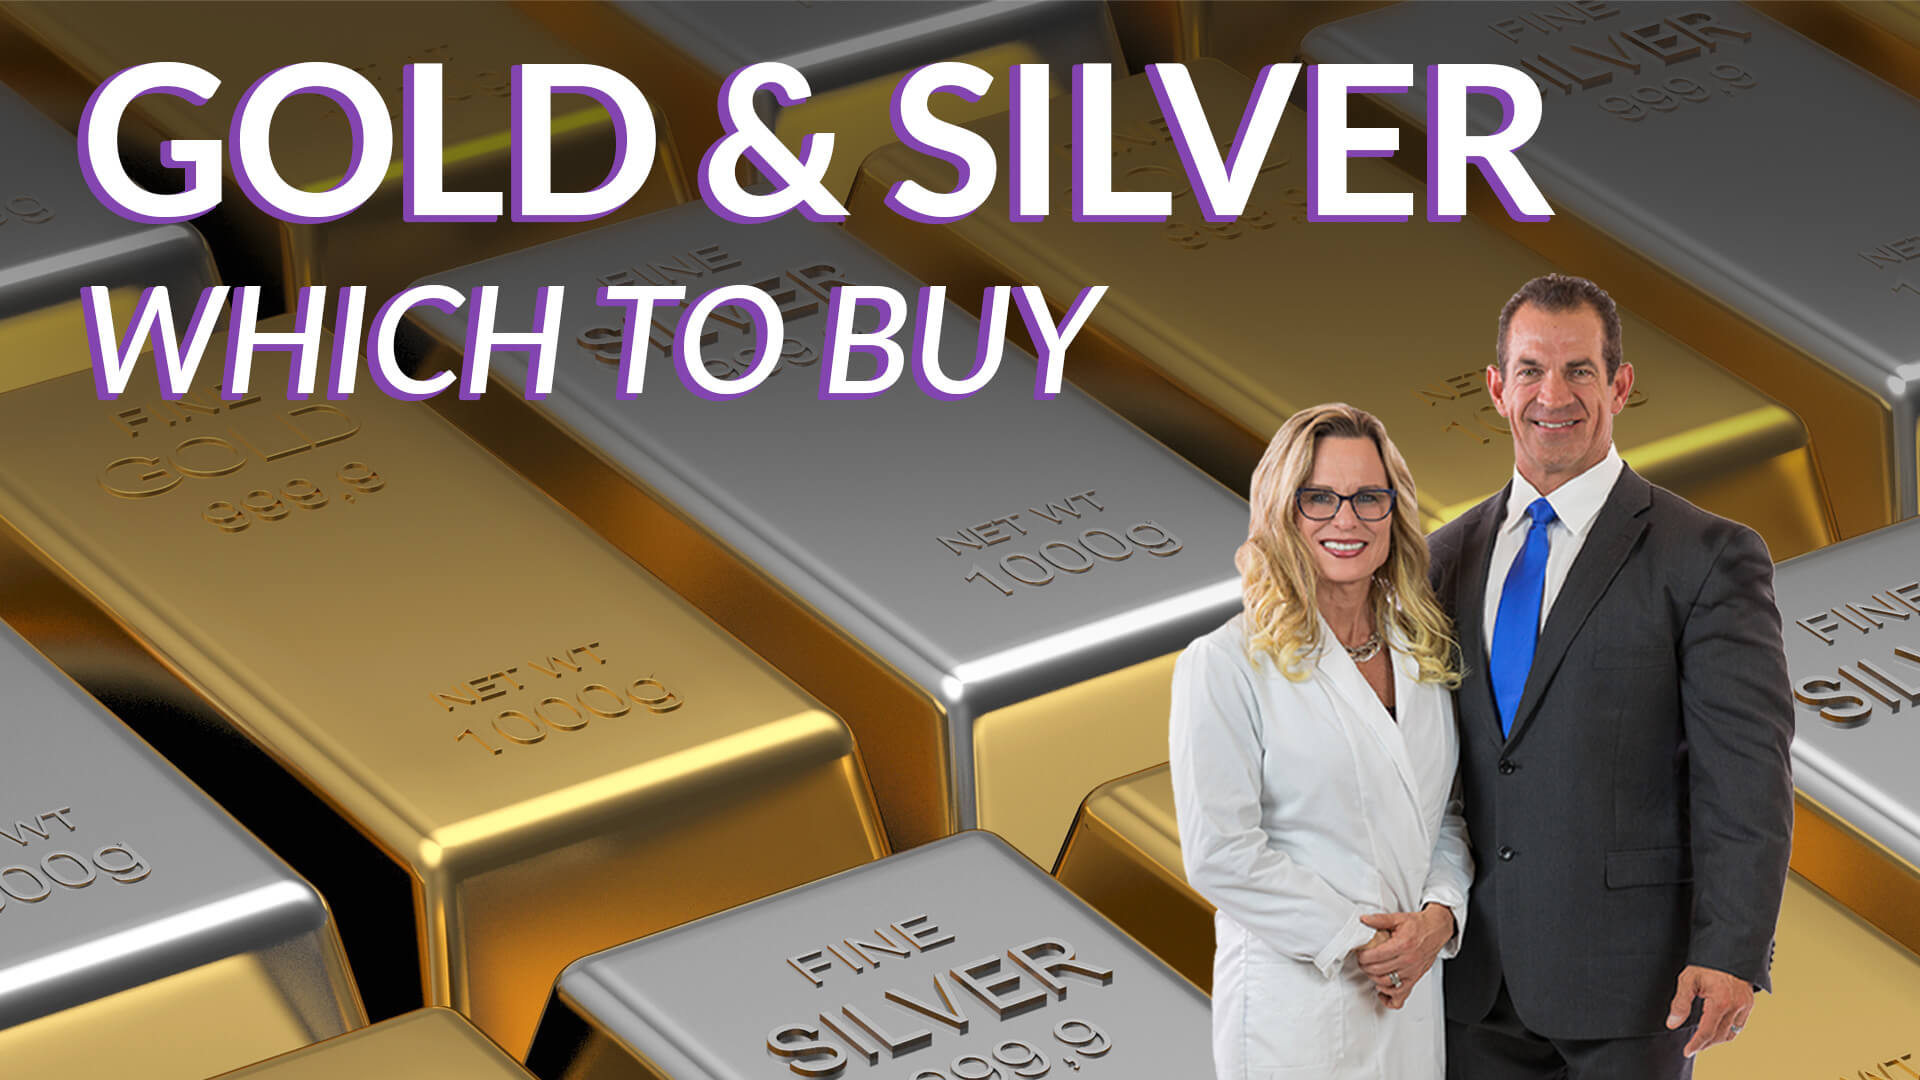 Ep 131: Gold vs Silver, which to buy? ft. Andrew Sorchini